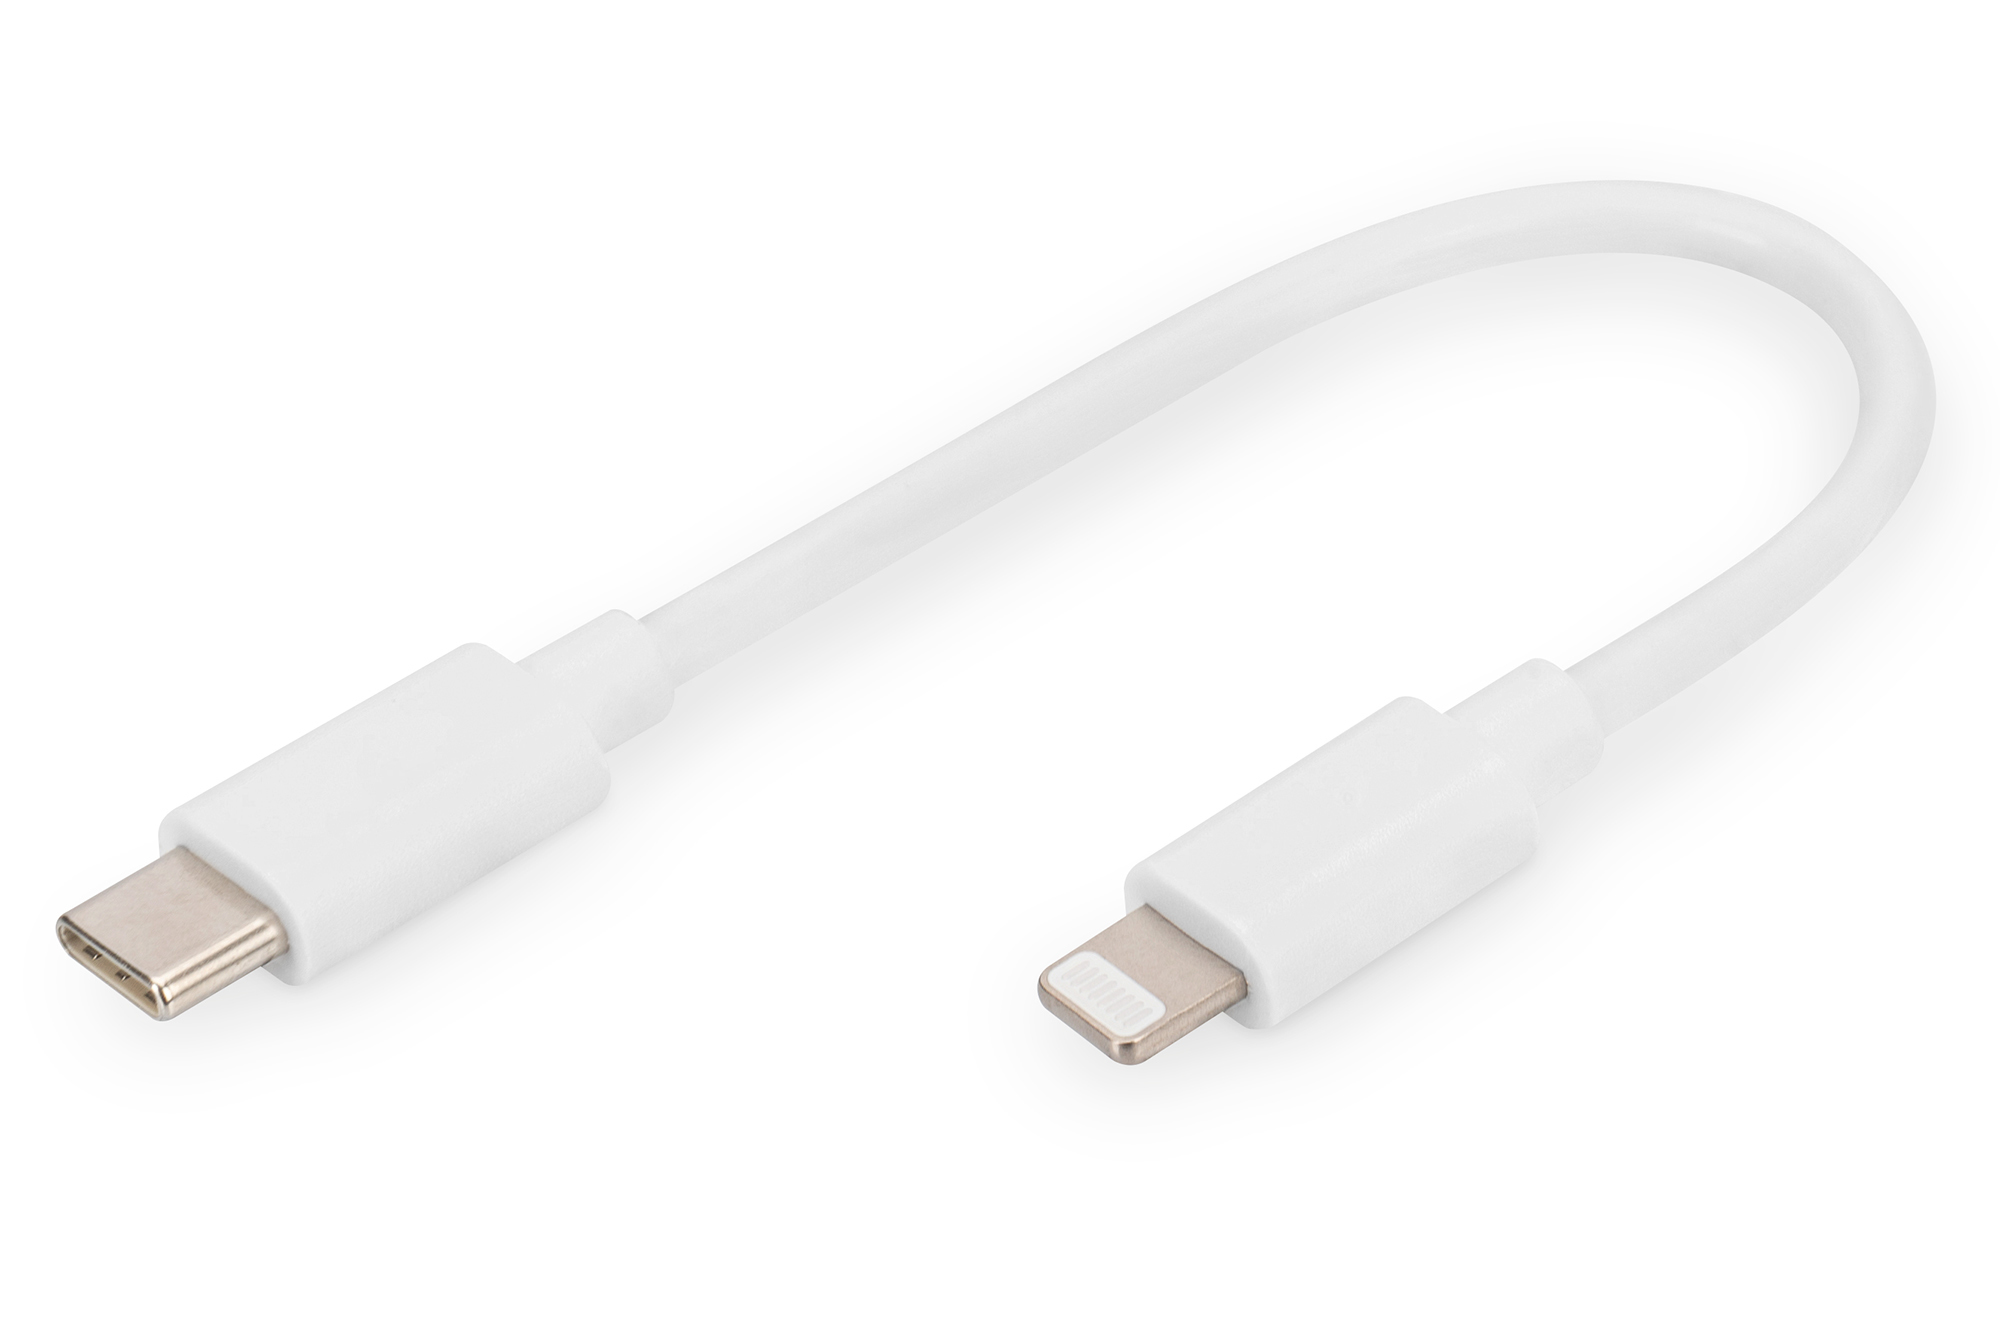 Photos - Cable (video, audio, USB) Digitus Lightning to USB-C data/charging cable, MFI-certified DB-600109-00 